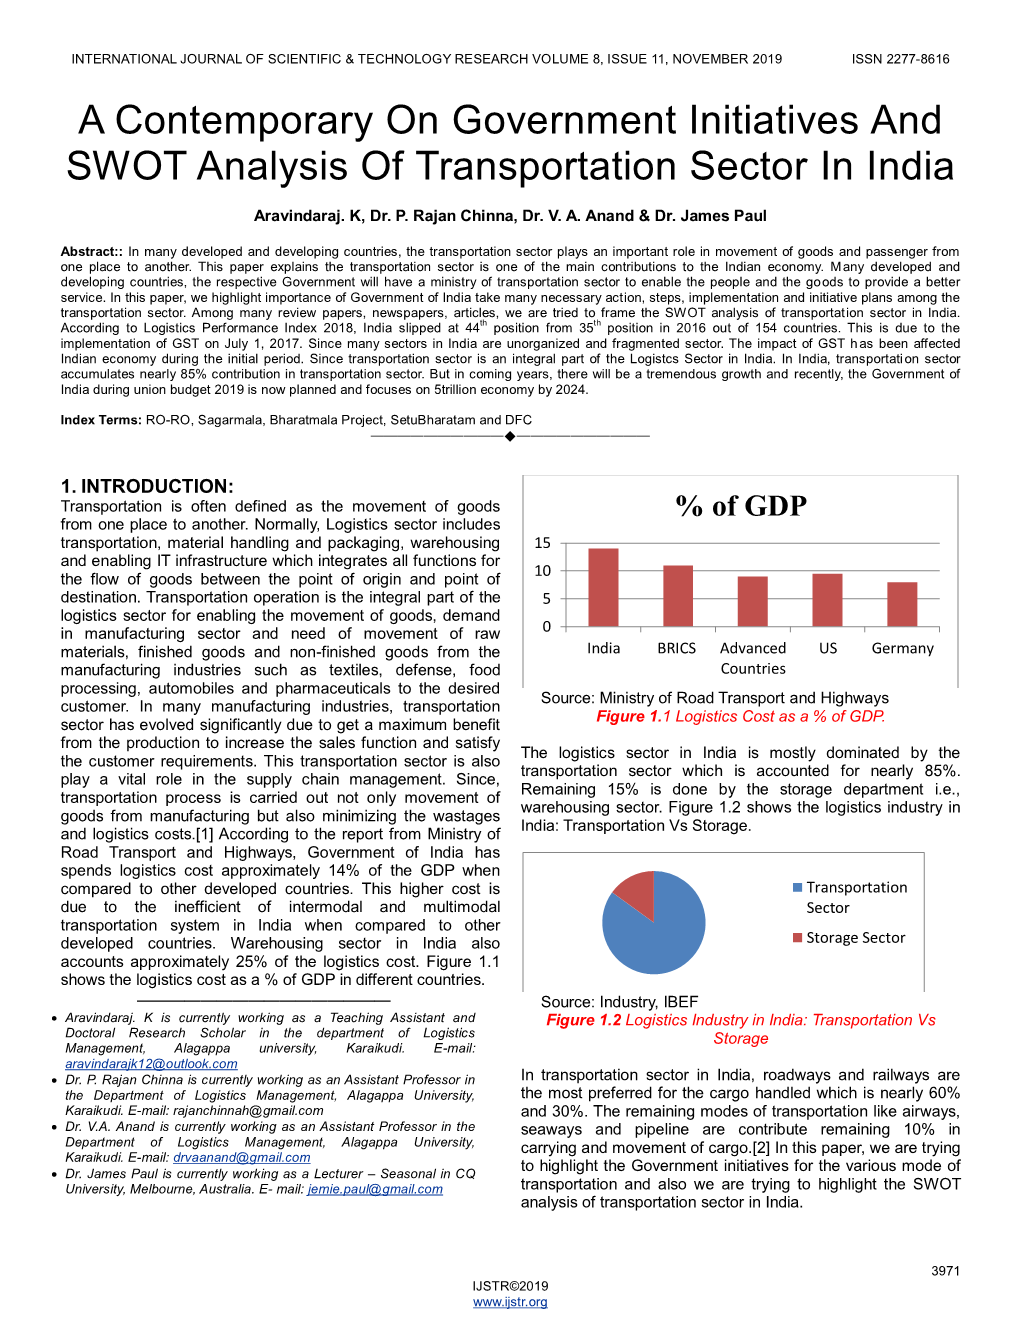 A Contemporary on Government Initiatives and SWOT Analysis of Transportation Sector in India